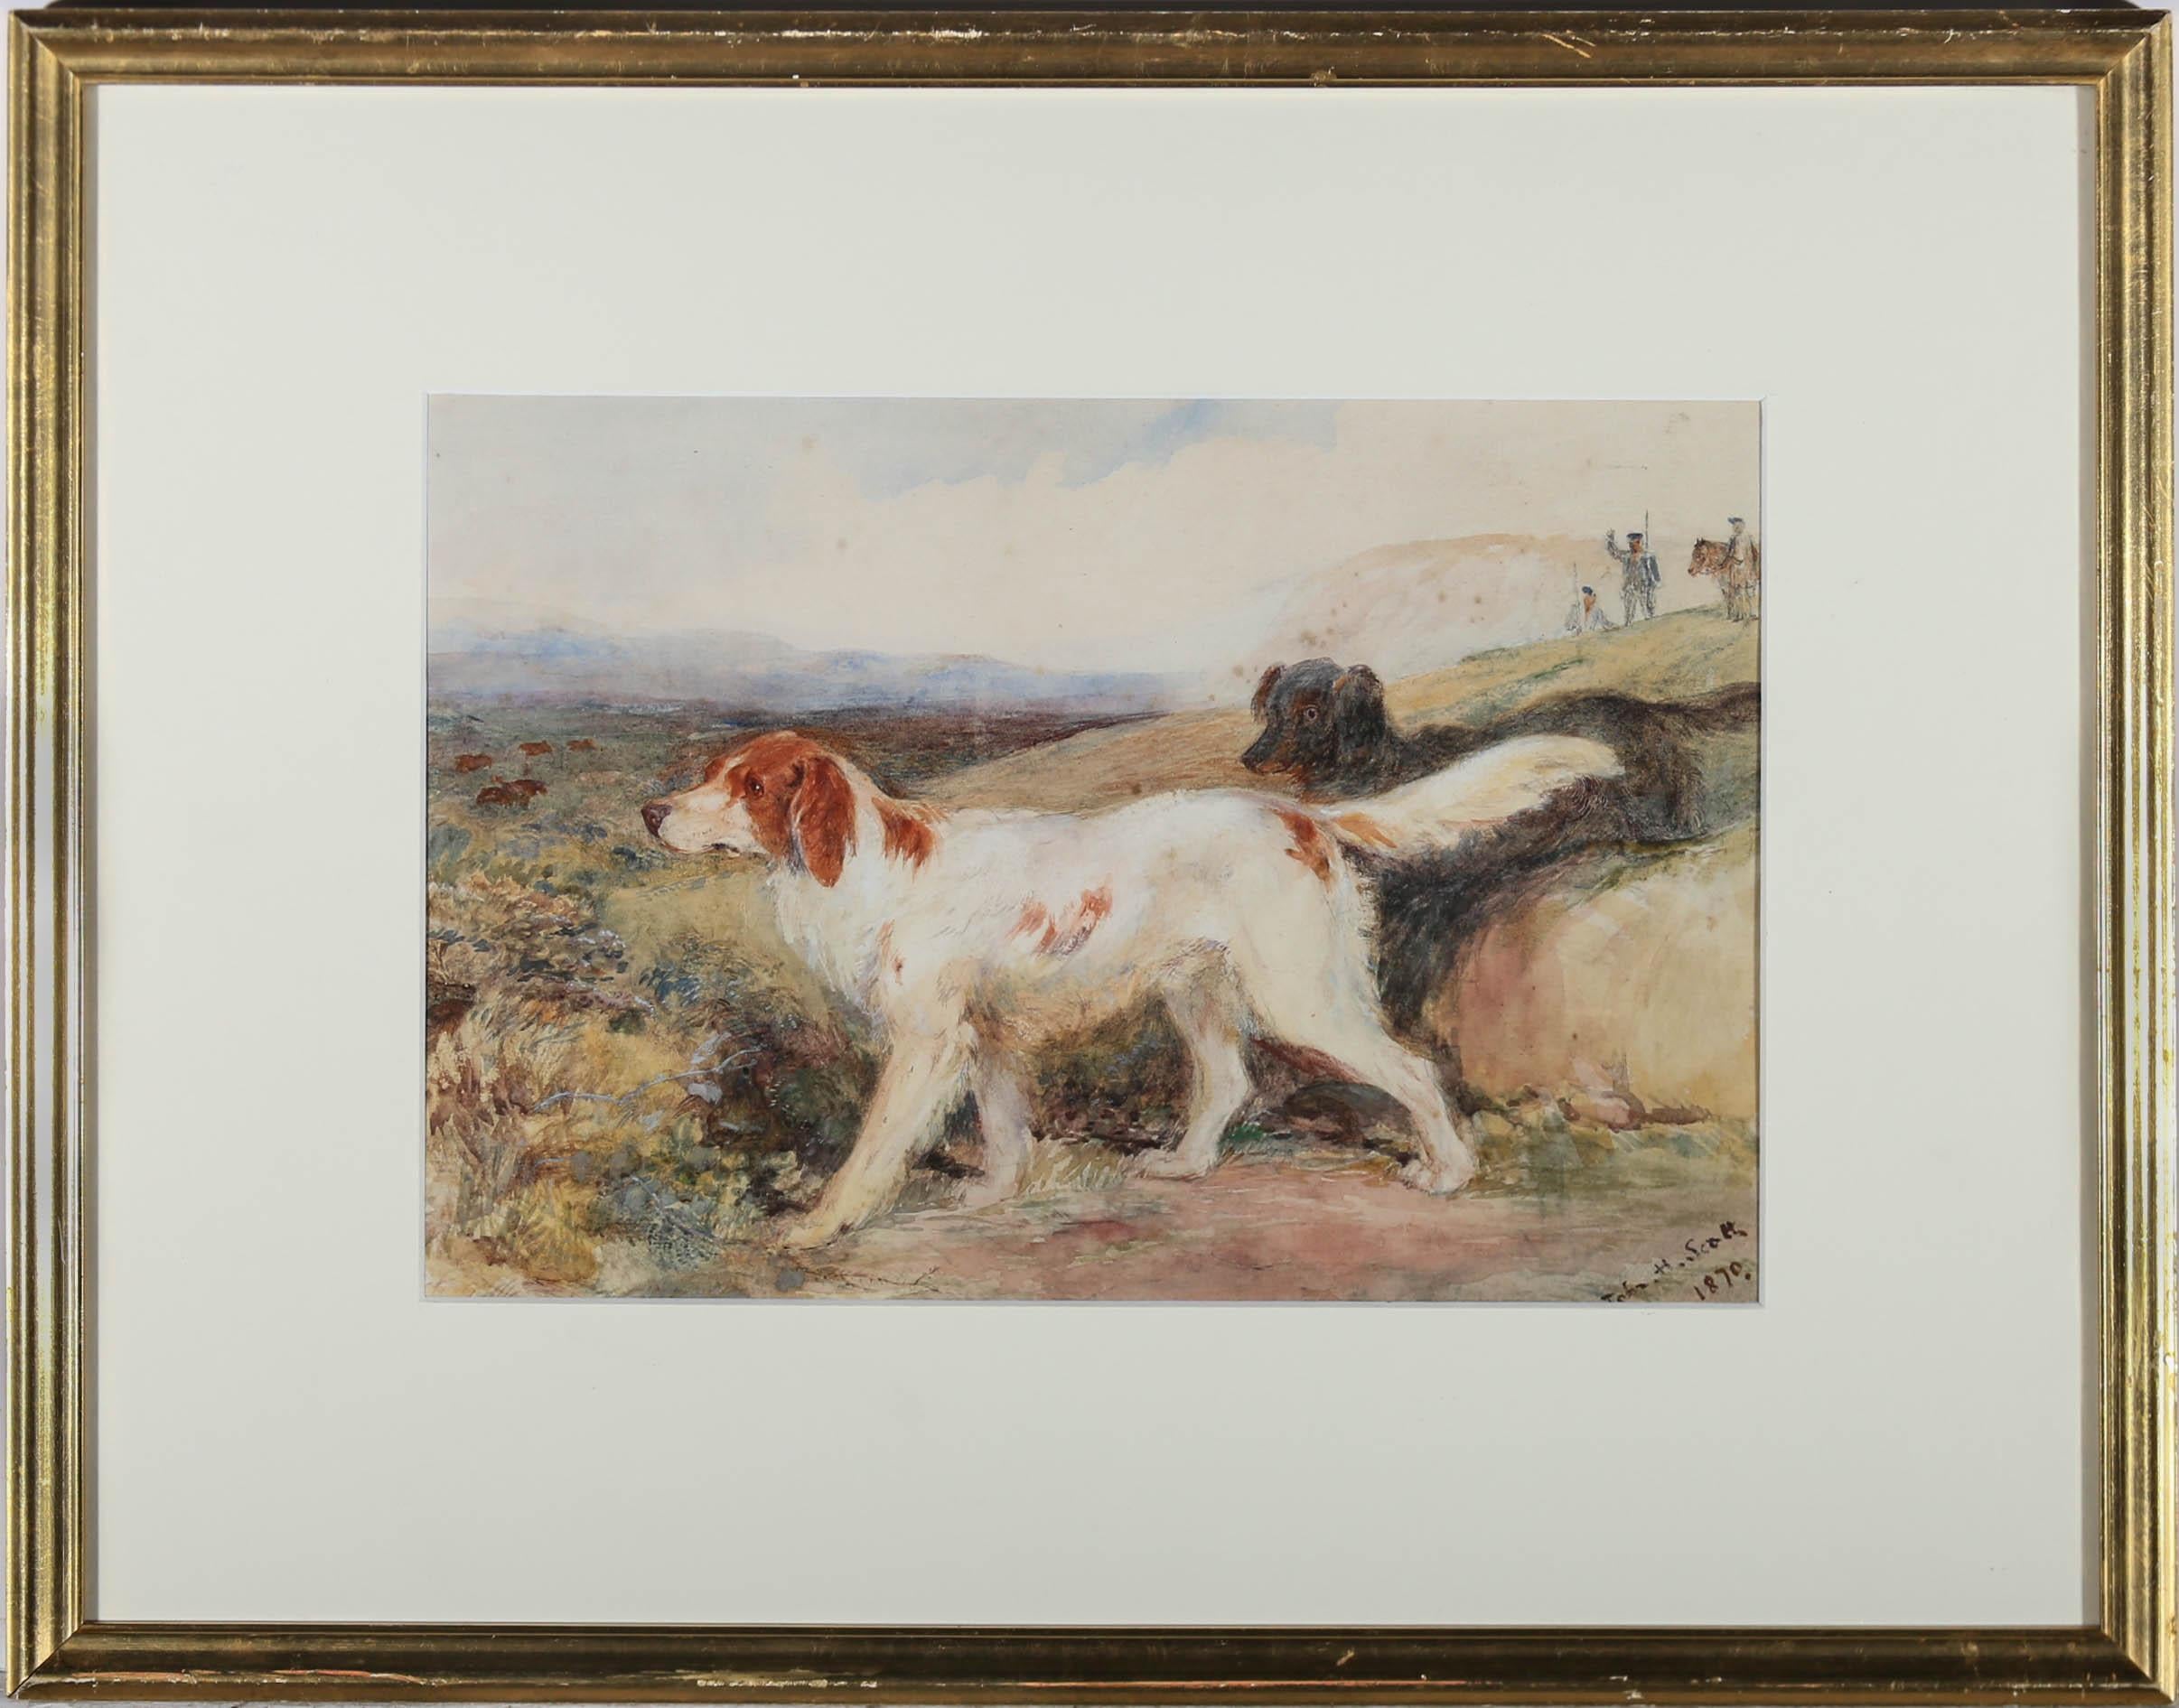 A particularly fine 19th century watercolour by John H. Scott (1829-1886), depicting two inquisitive setters retrieving grouse in the glorious moors of Scotland. Signed and dated to the lower right. Smartly mounted in a quality gilt frame. On paper.